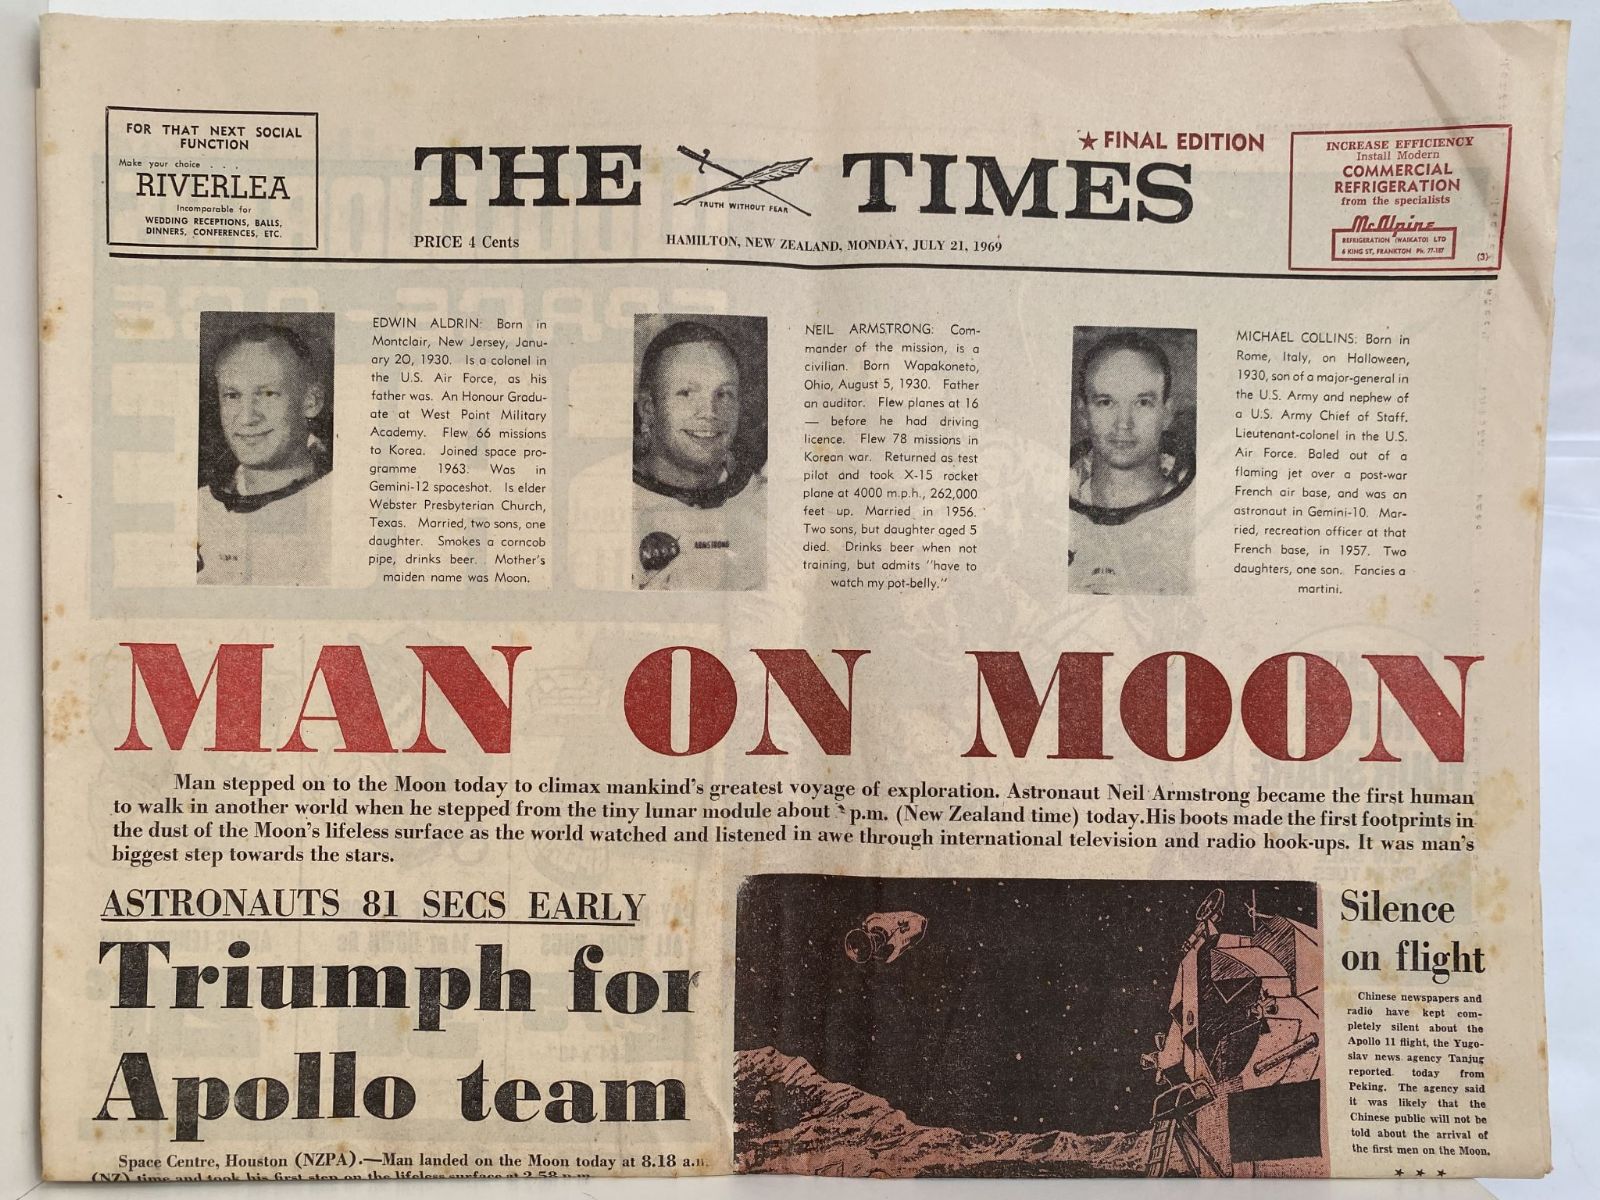 OLD NEWSPAPER: The Waikato Times, 21 July 1969 - Moon Landing Special